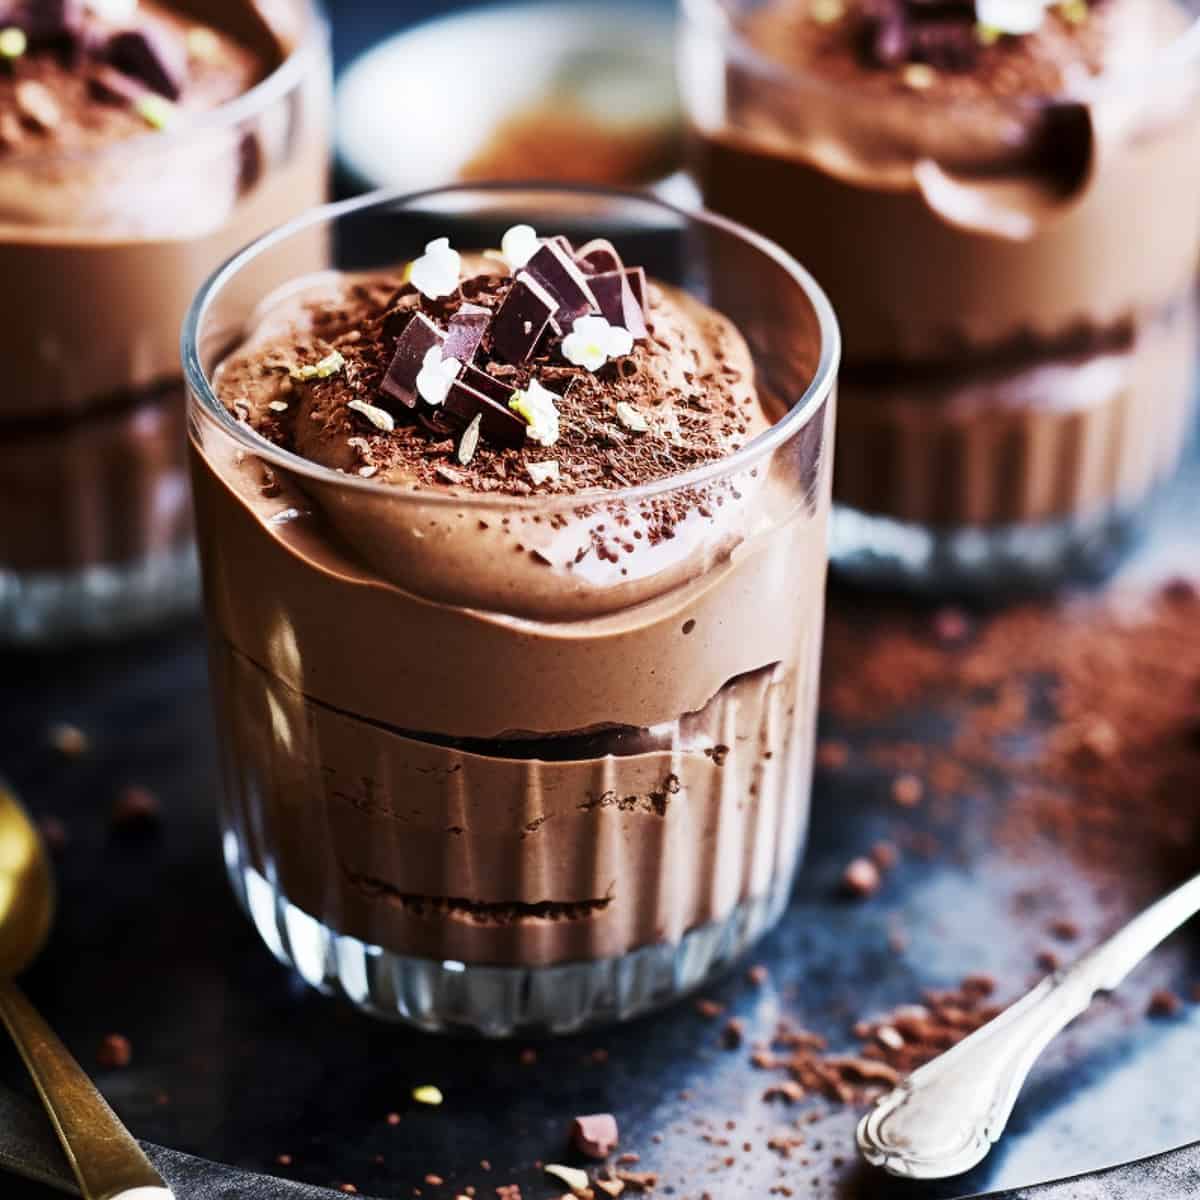 Easy Chocolate Mousse with chocolate shavings.